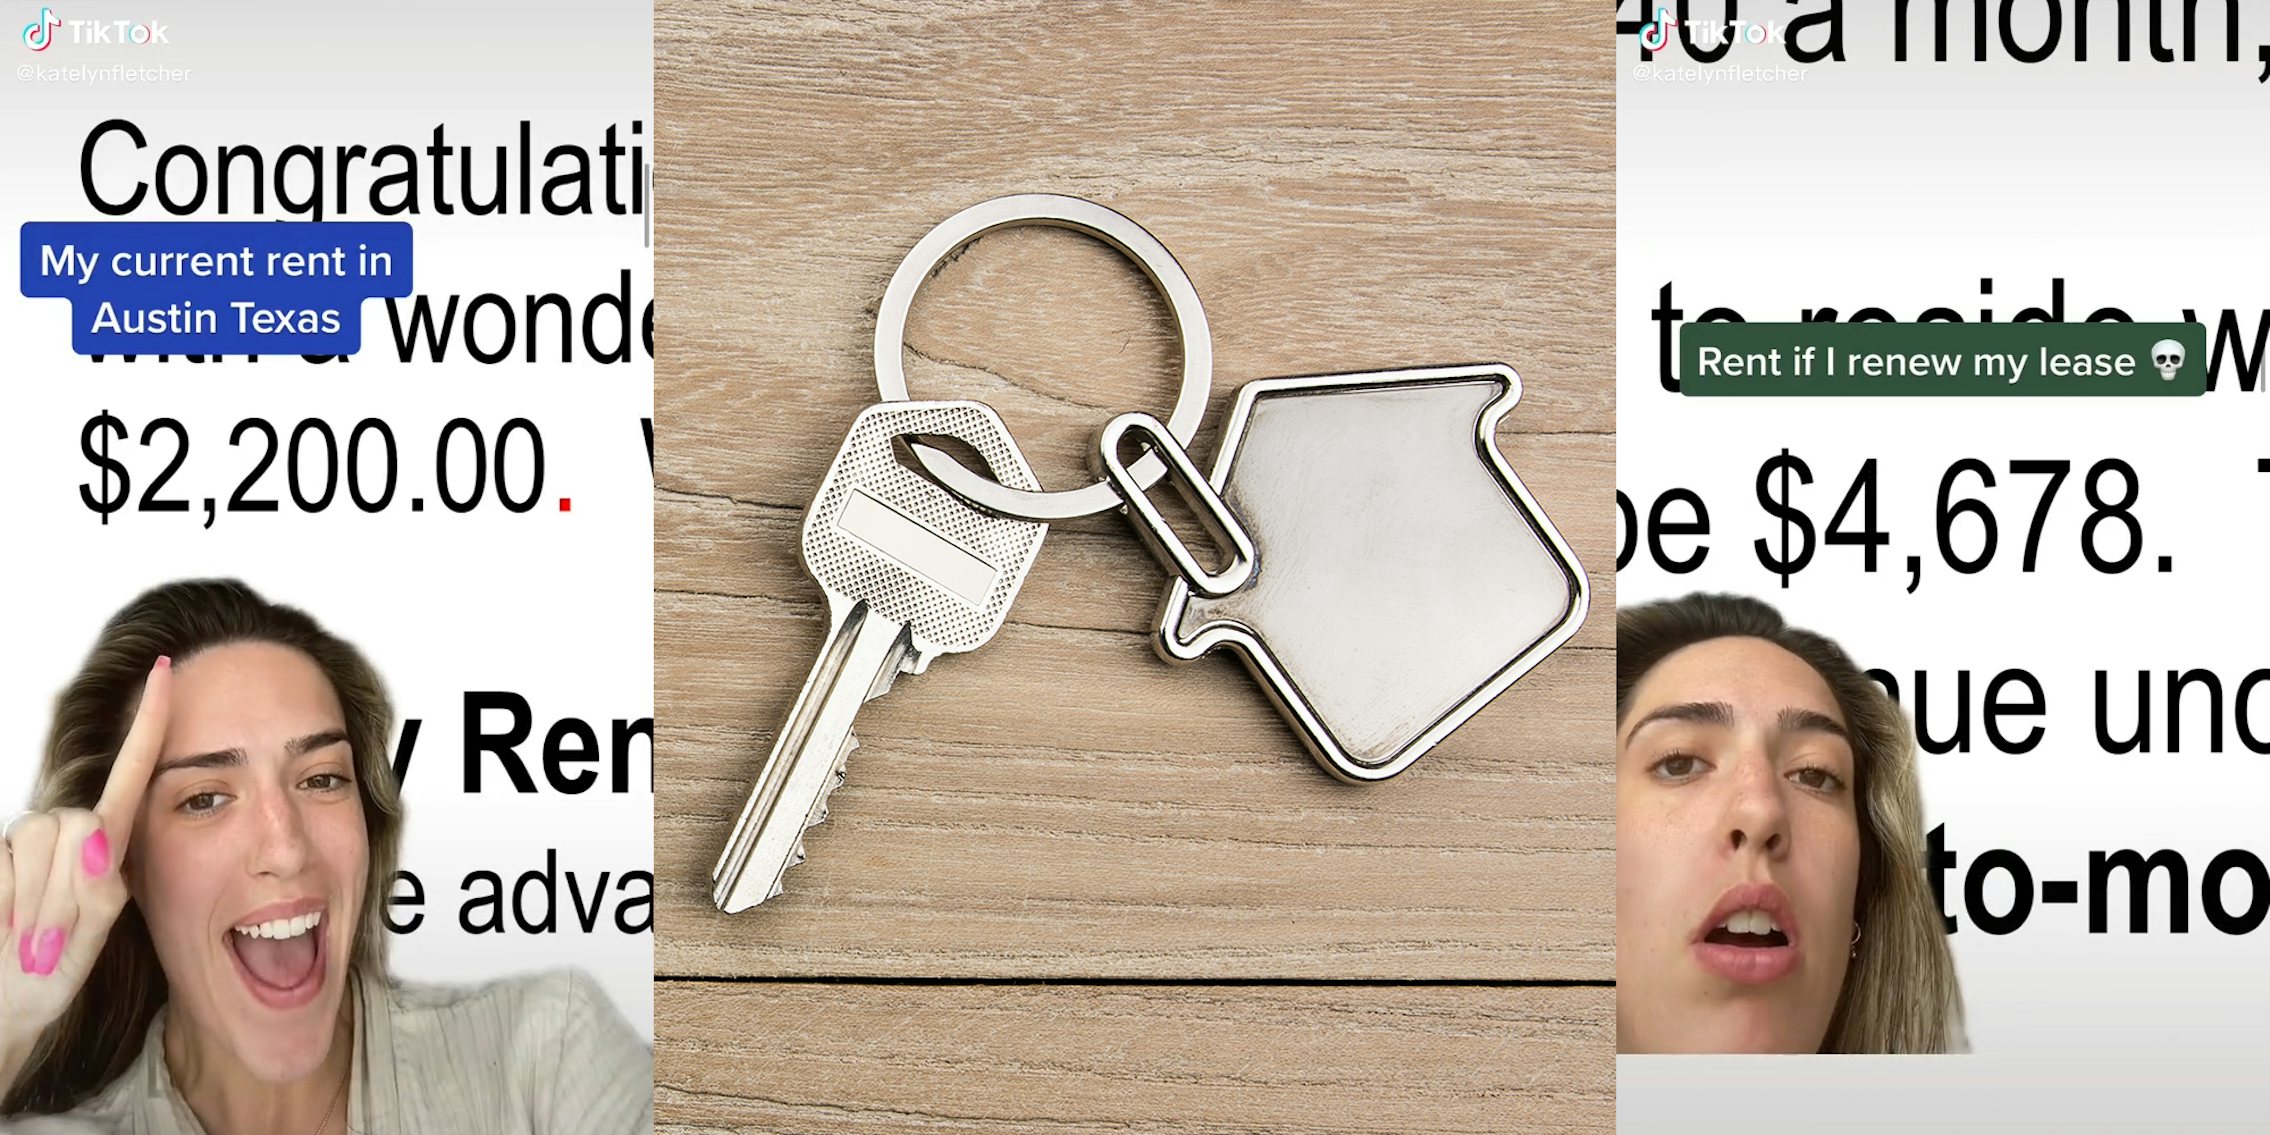 young woman pointing at $2,200 text in background with caption 'My current rent in Austin Texas' (l) key on house keychain (c) same young woman with dismayed look in front of $4,678 text in background with caption 'rent if I renew my lease'